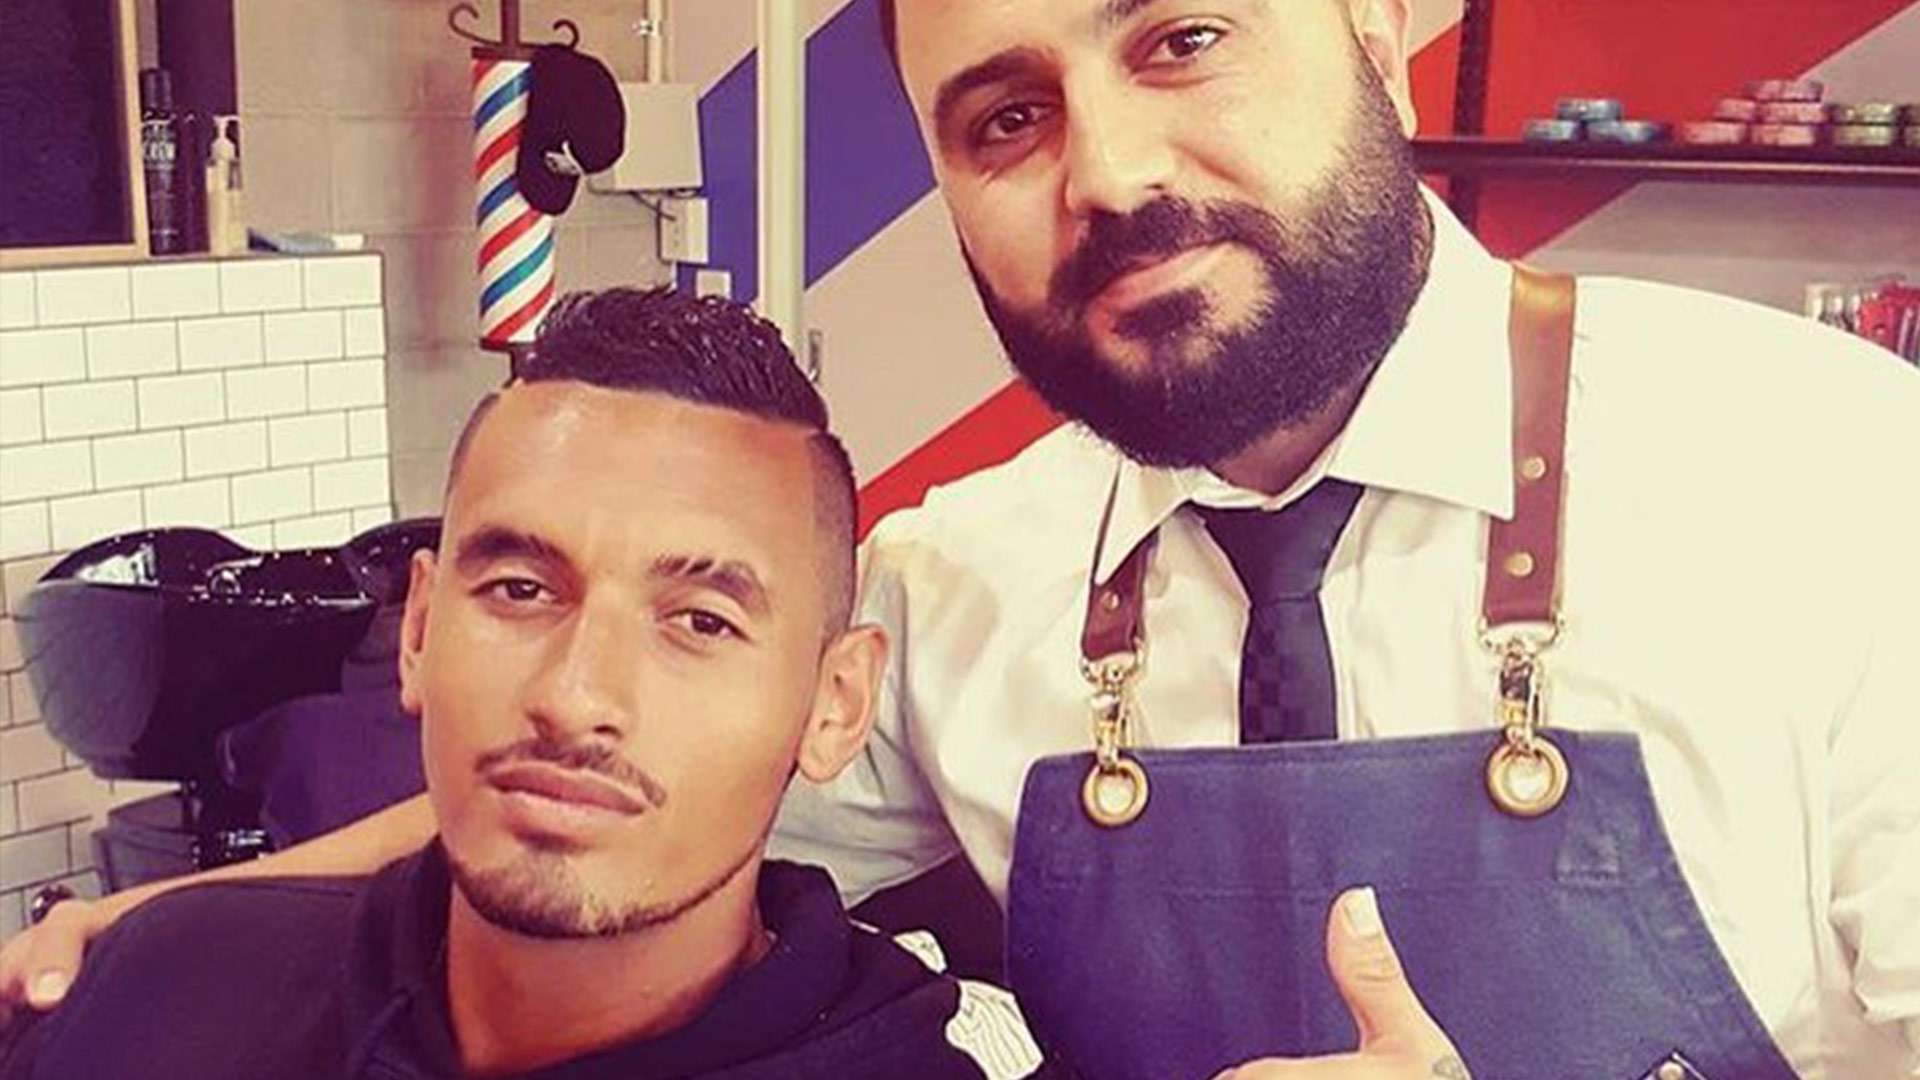 Nick Kyrgios is spotted getting his hair style at Dapper Gents Barbershop